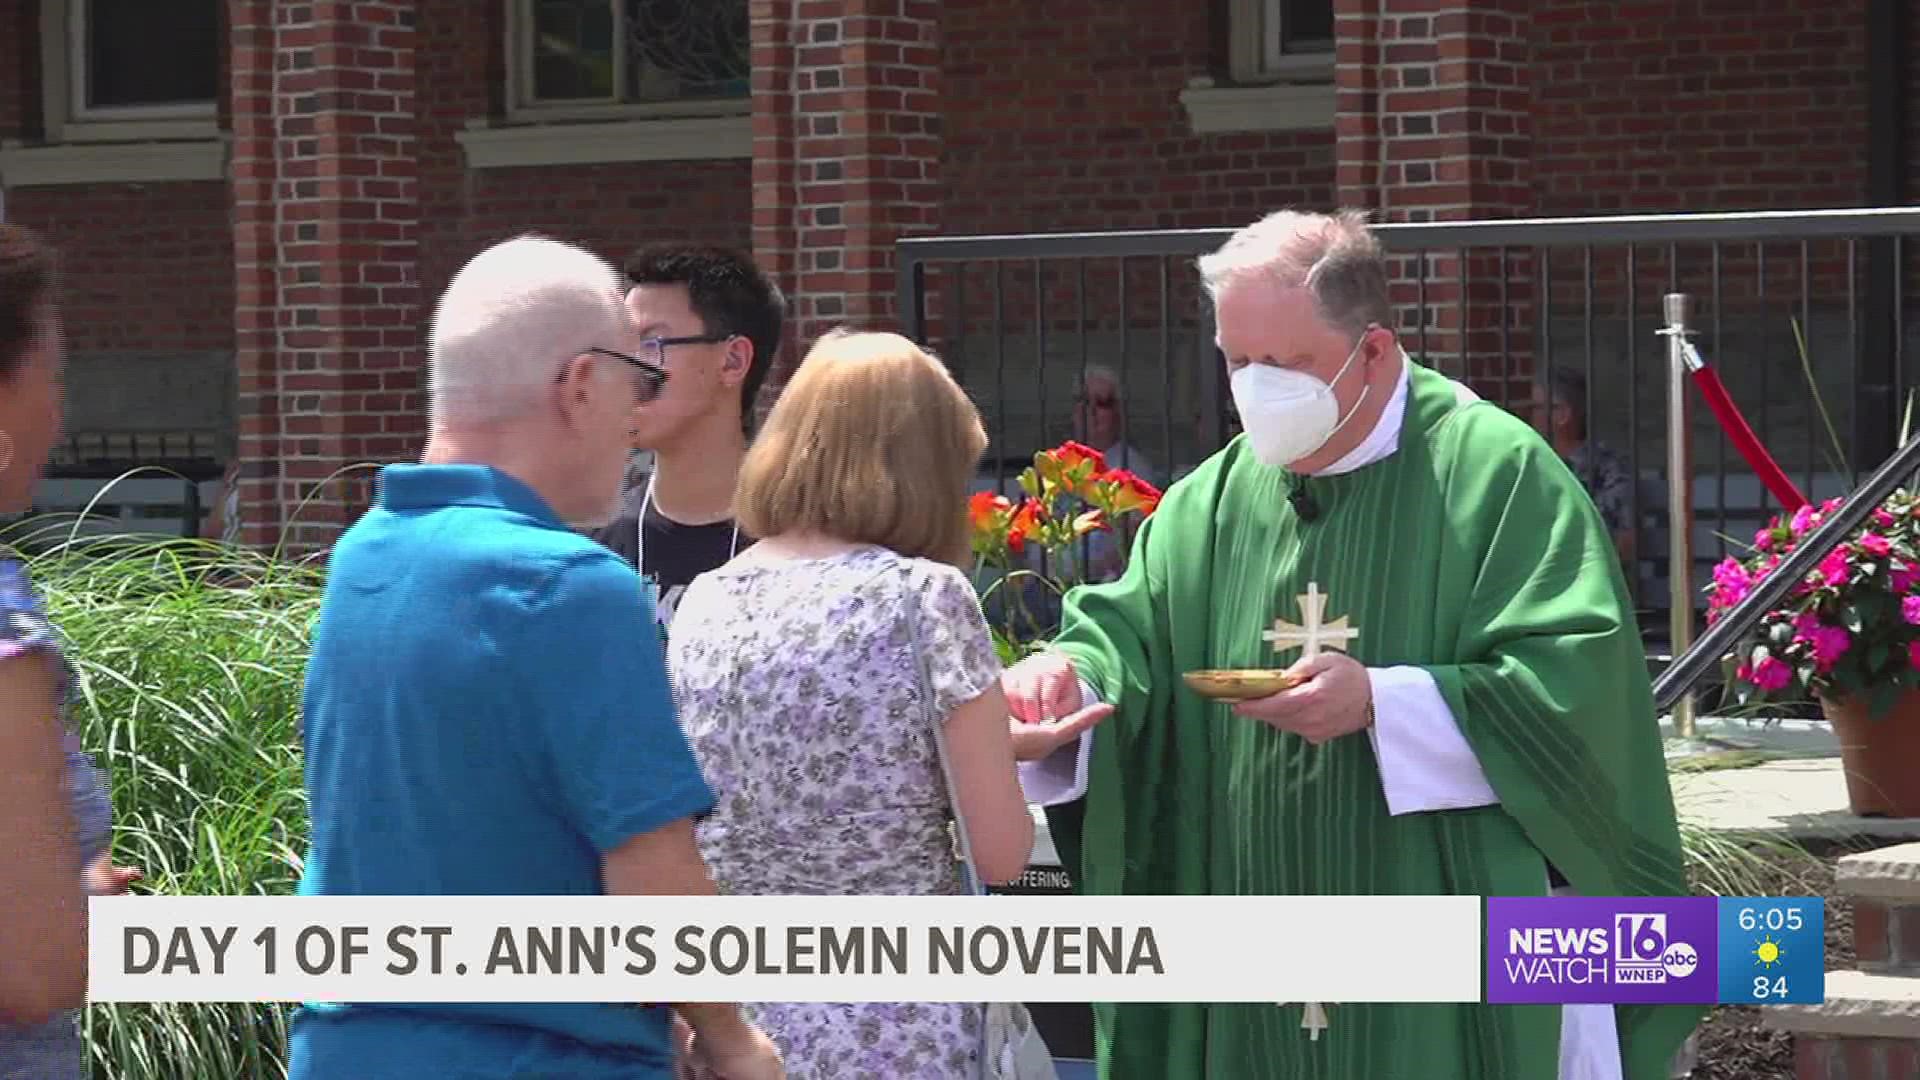 The Novena will take place over the next 9 days here at St. Ann's Monastery and Shrine Basilica in Scranton.